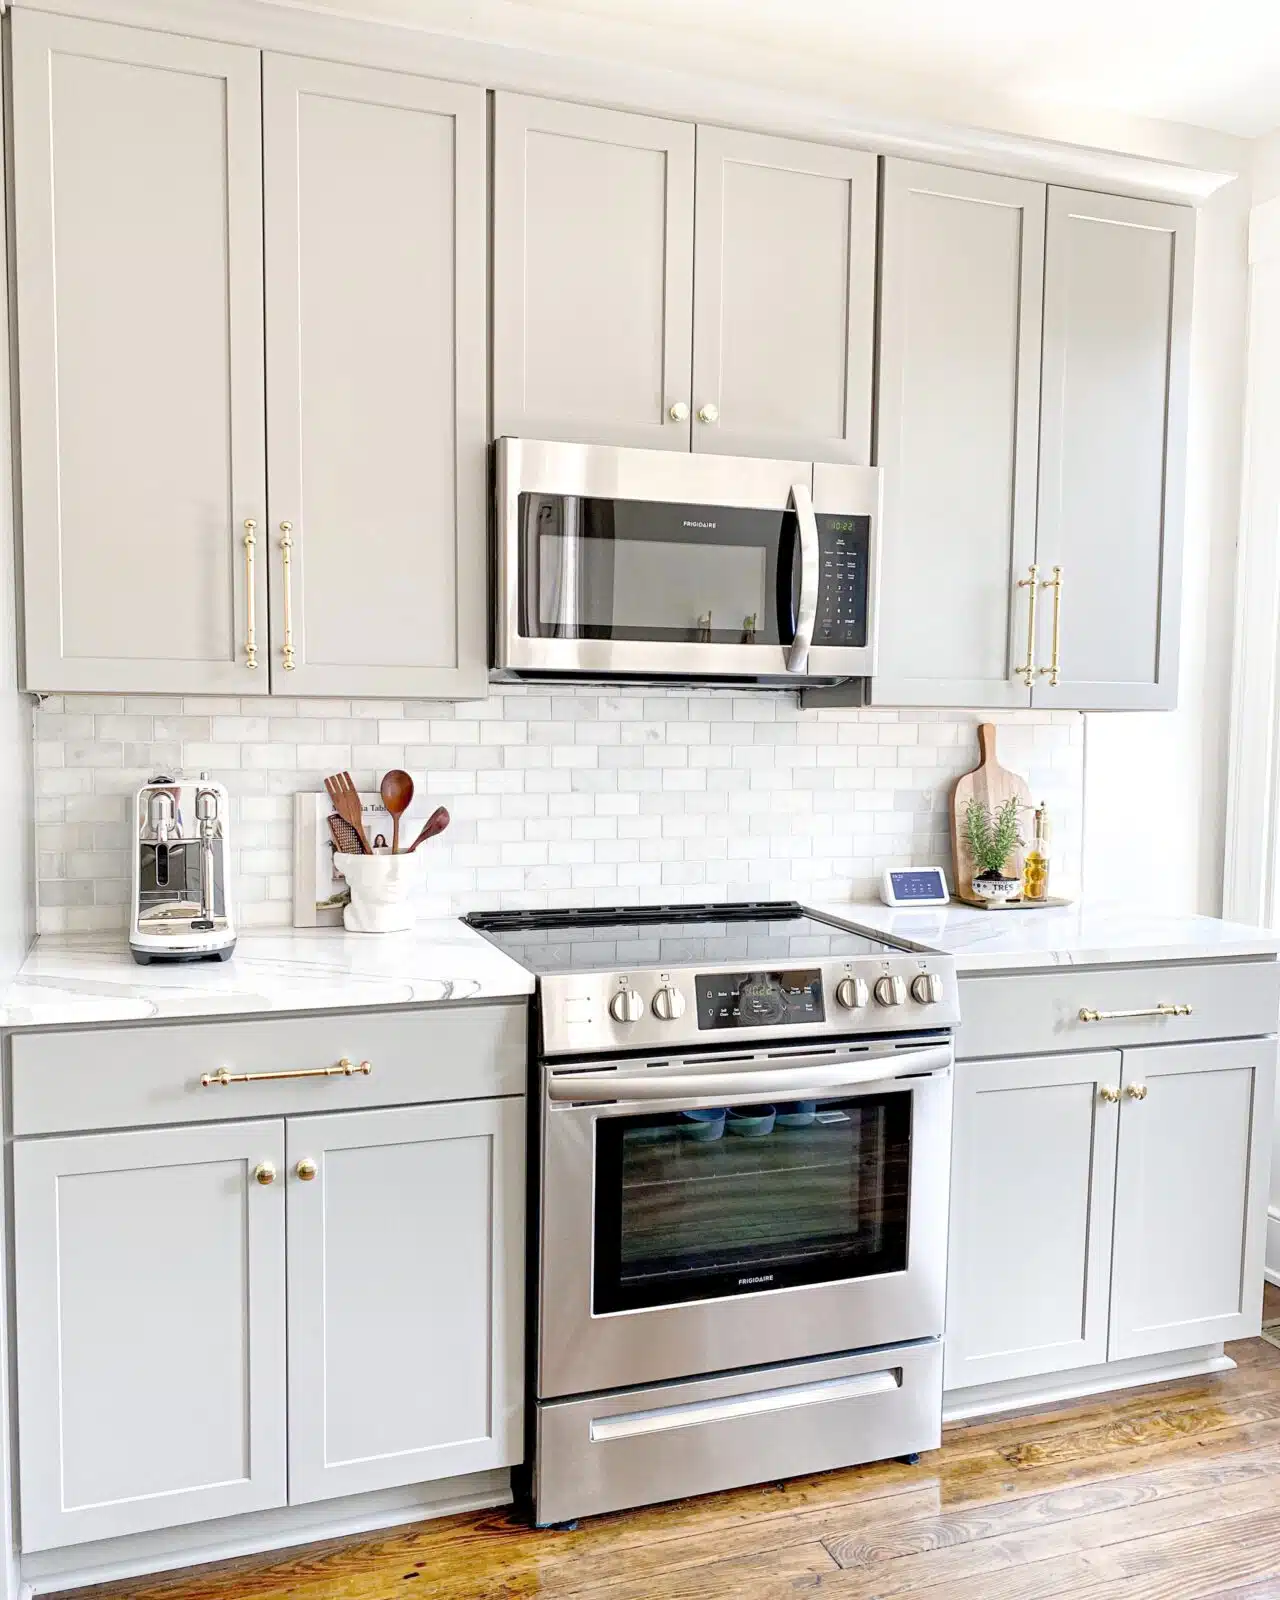 5 Tips To Make Your Kitchen More Manageable